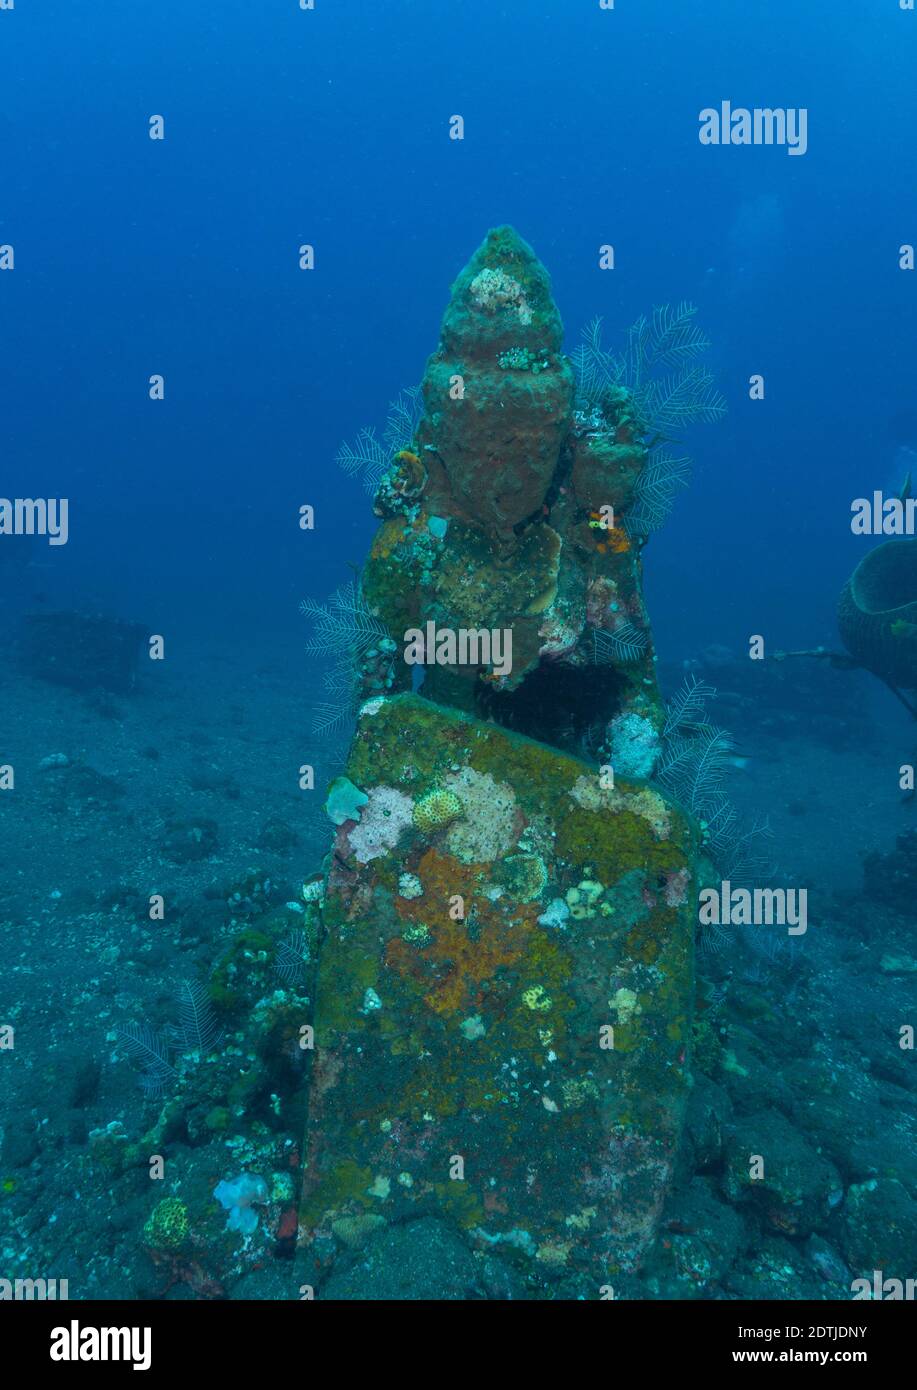 Underwater Buddha Statue in Bali (image taken during scuba diving in Coral Garden dive site off Tulamben) Stock Photo